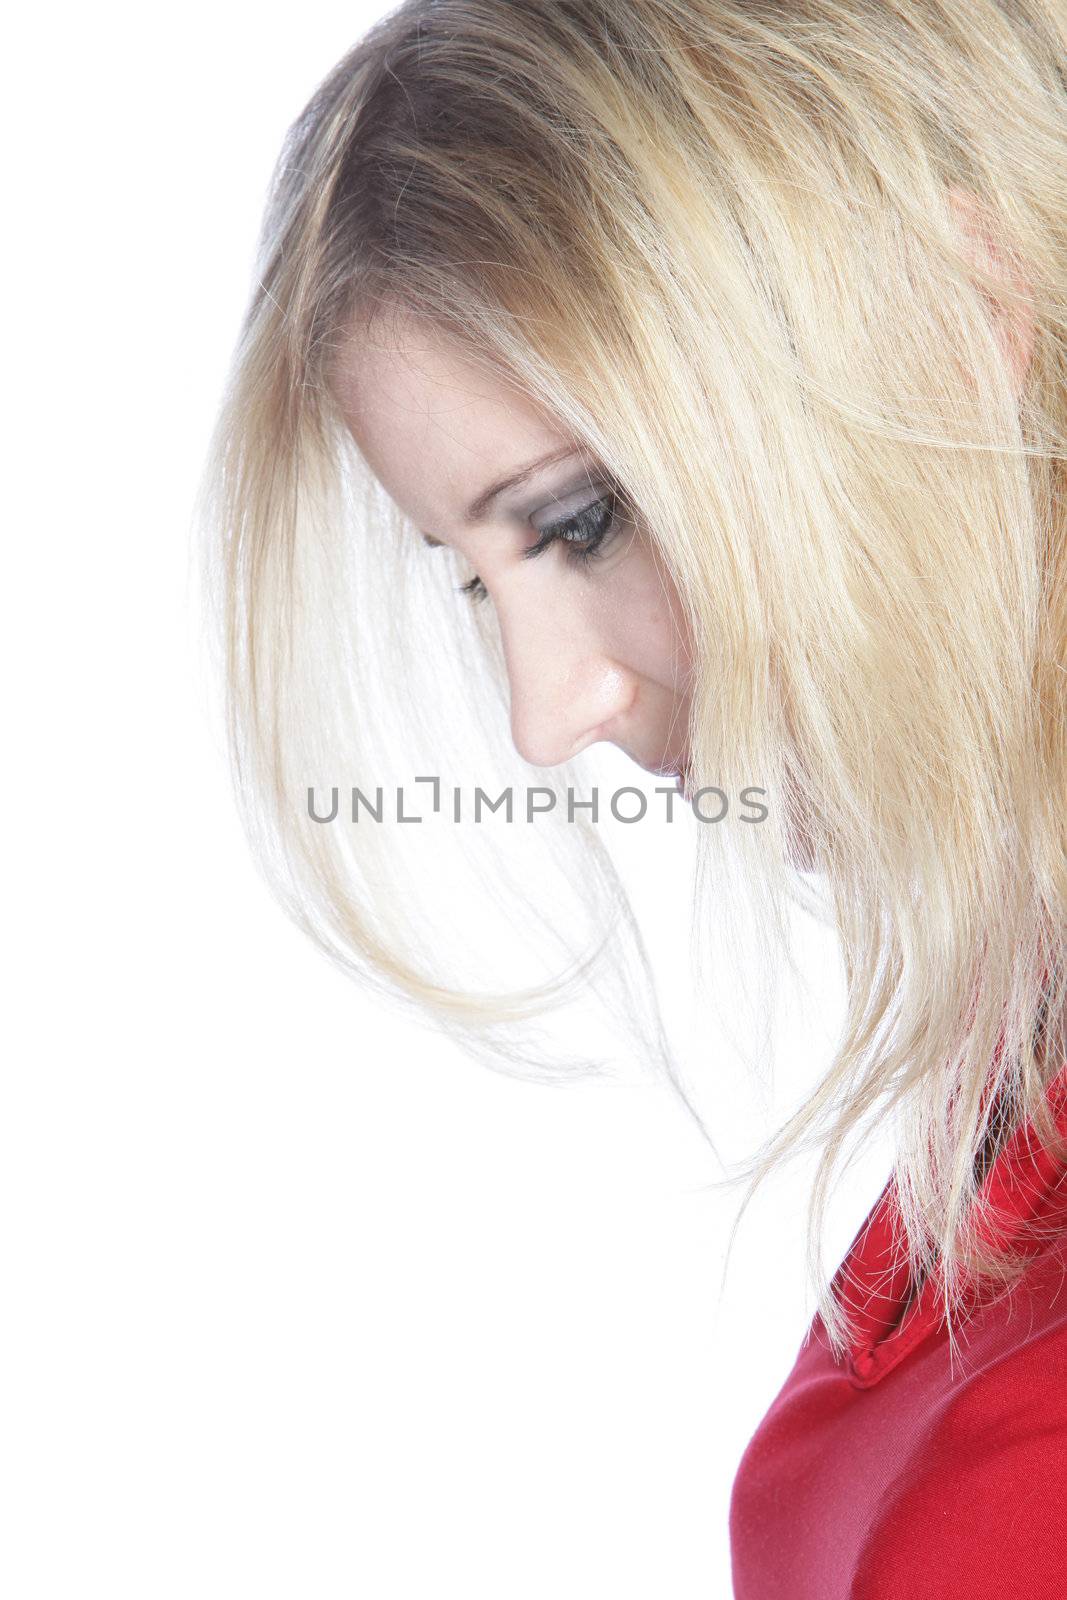 Closeup sideways portrait of the head of a dejected young woman looking down with her blonde hair partially obscuring her face